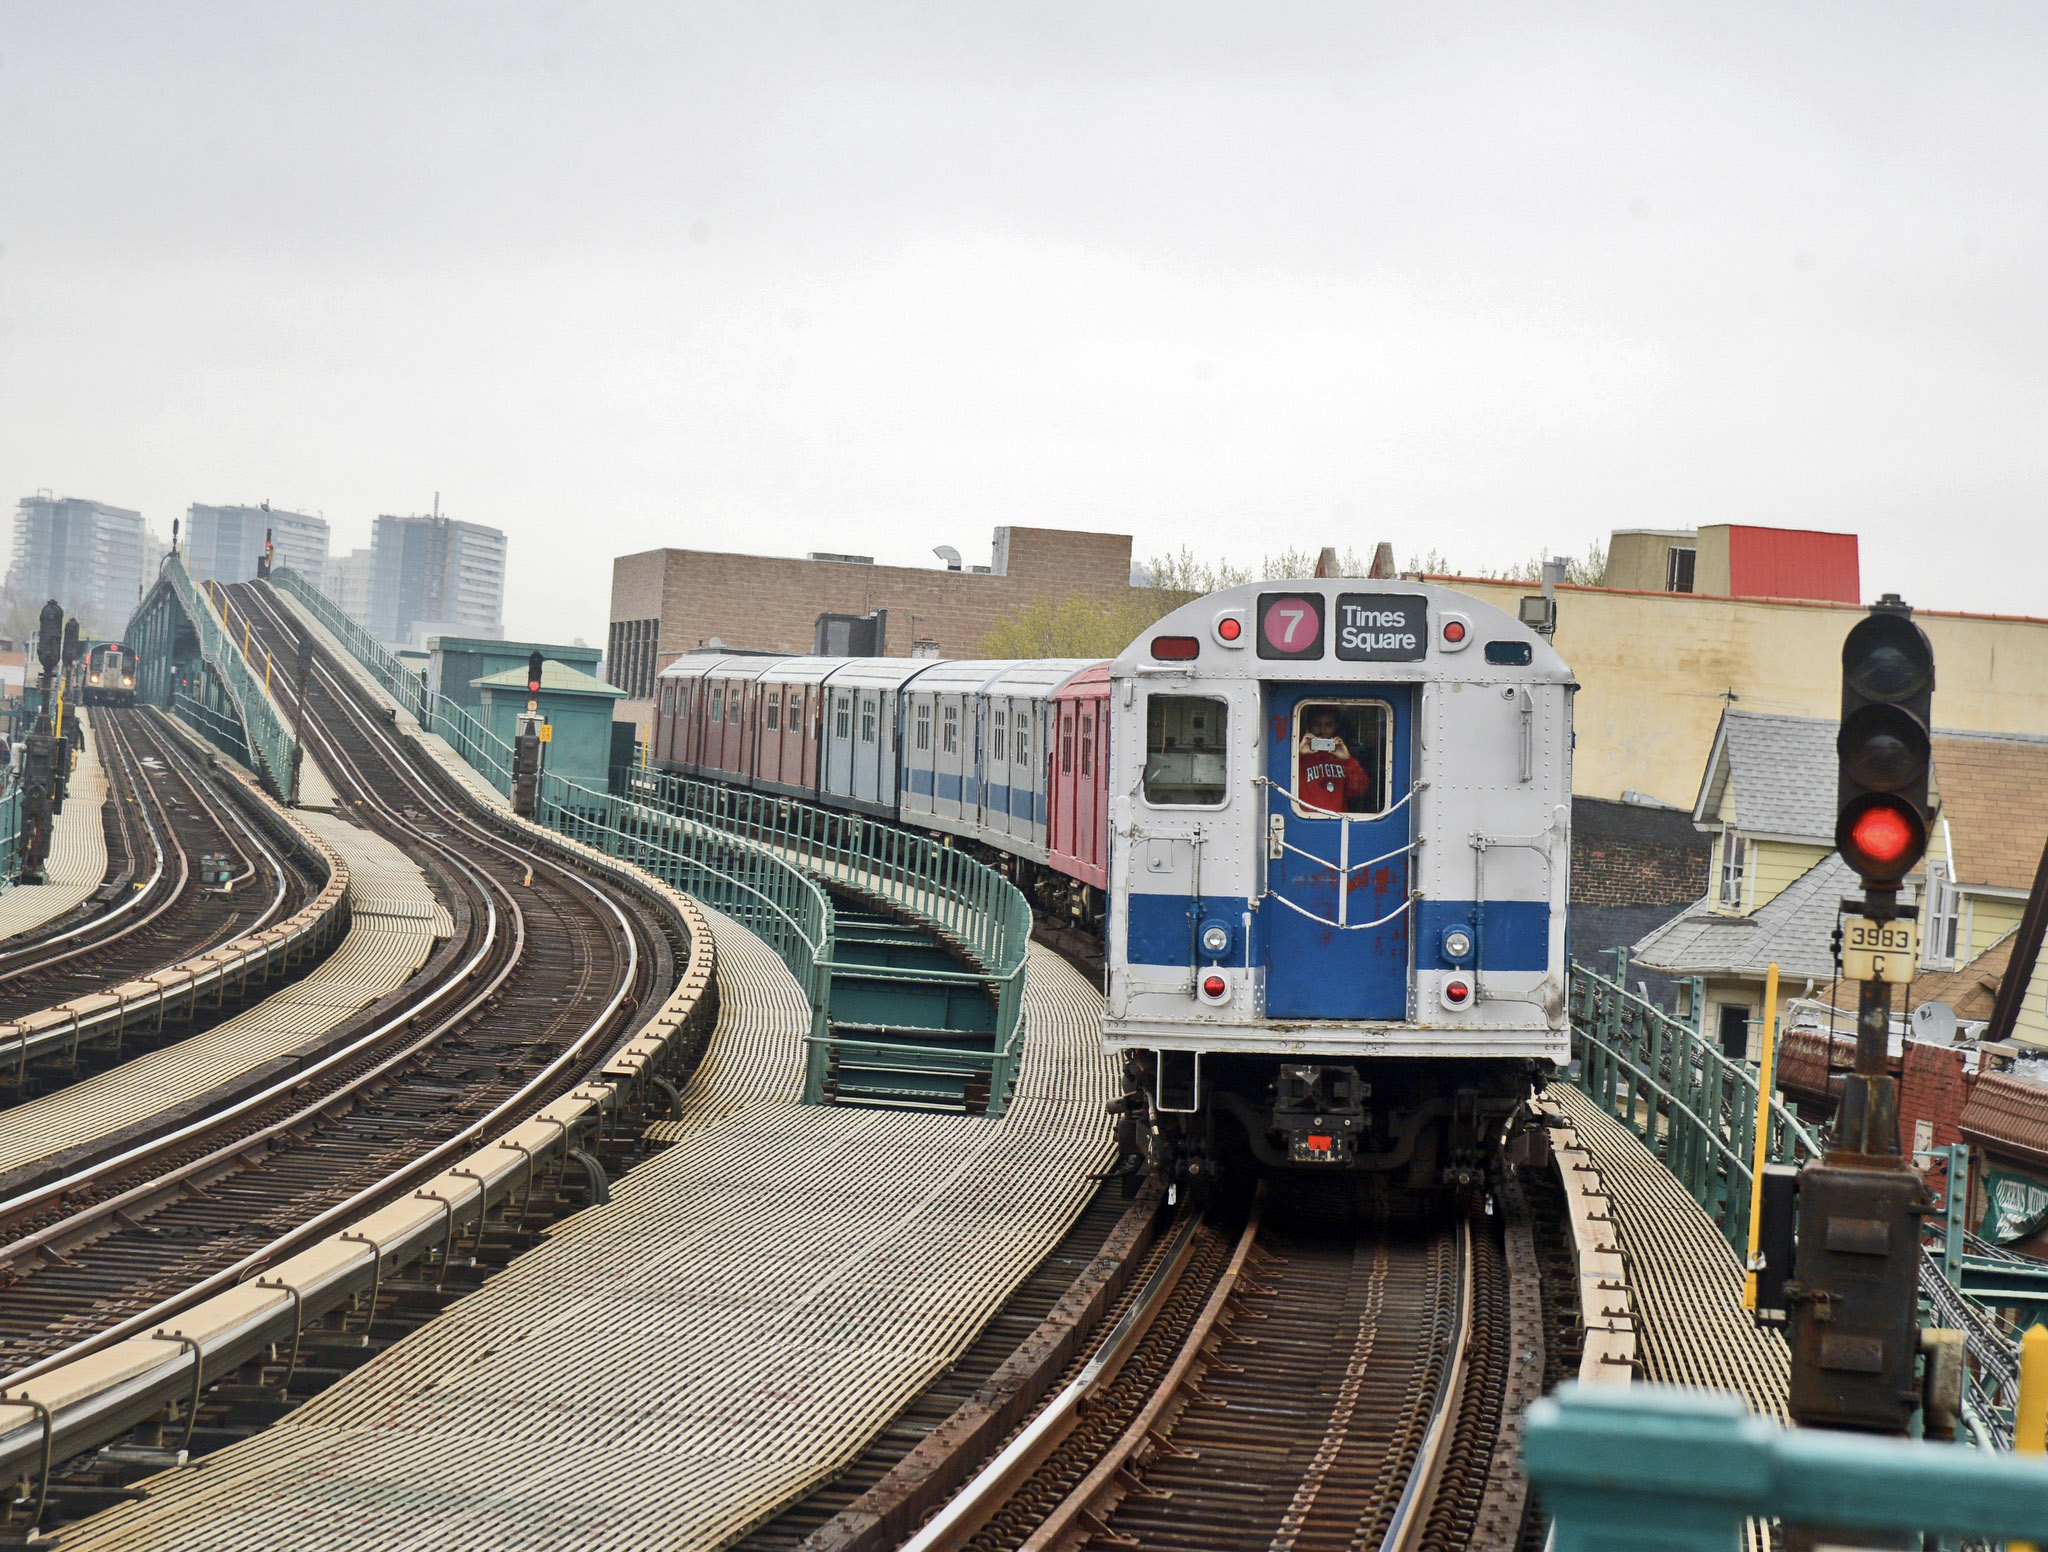 The "Train of Many Colors" ran on the 7 line on Fri., April 21, 2017 to commemorate the 100th anniversary of the start of service on the Flushing Line extension to 103 St. Photo: Marc A. Hermann / MTA New York City Transit